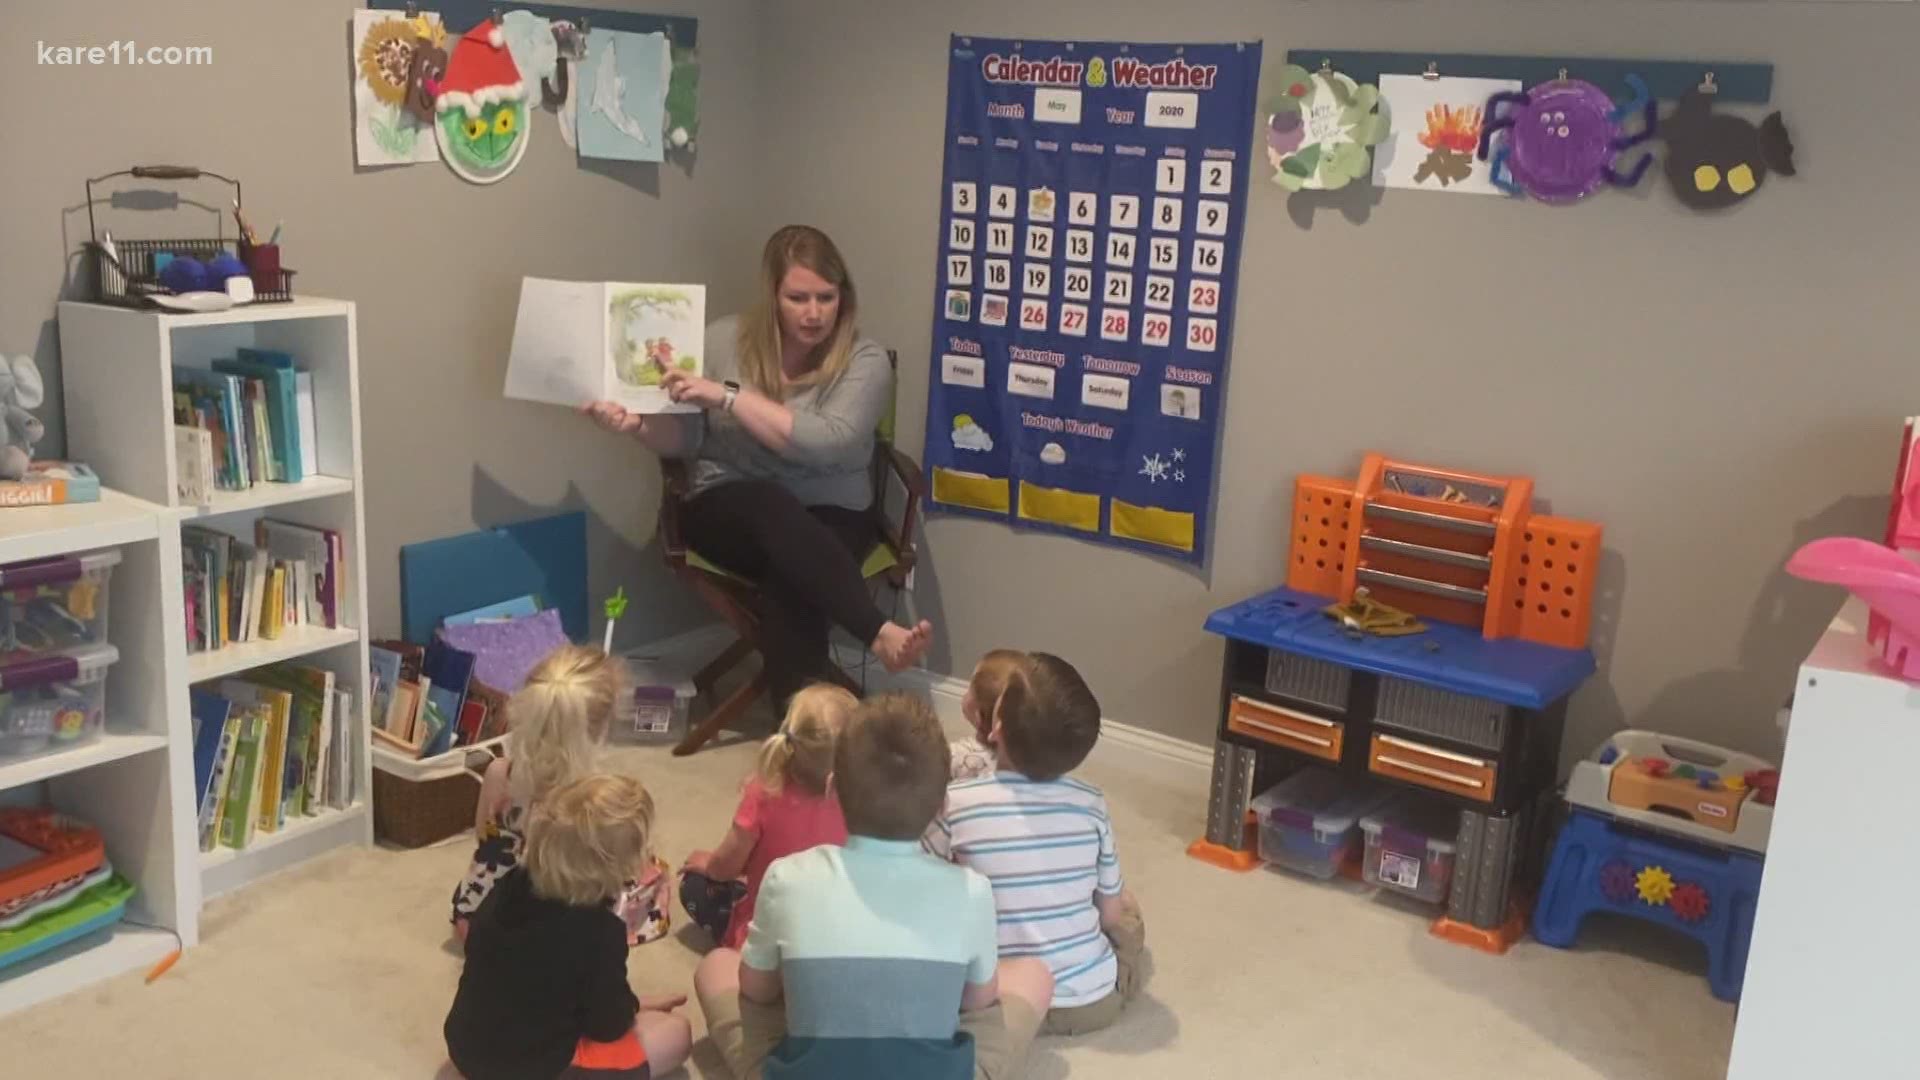 Gov. Tim Walz said he would support daycares that kept their doors open for children of essential workers. But thousands of providers say that help has not come.